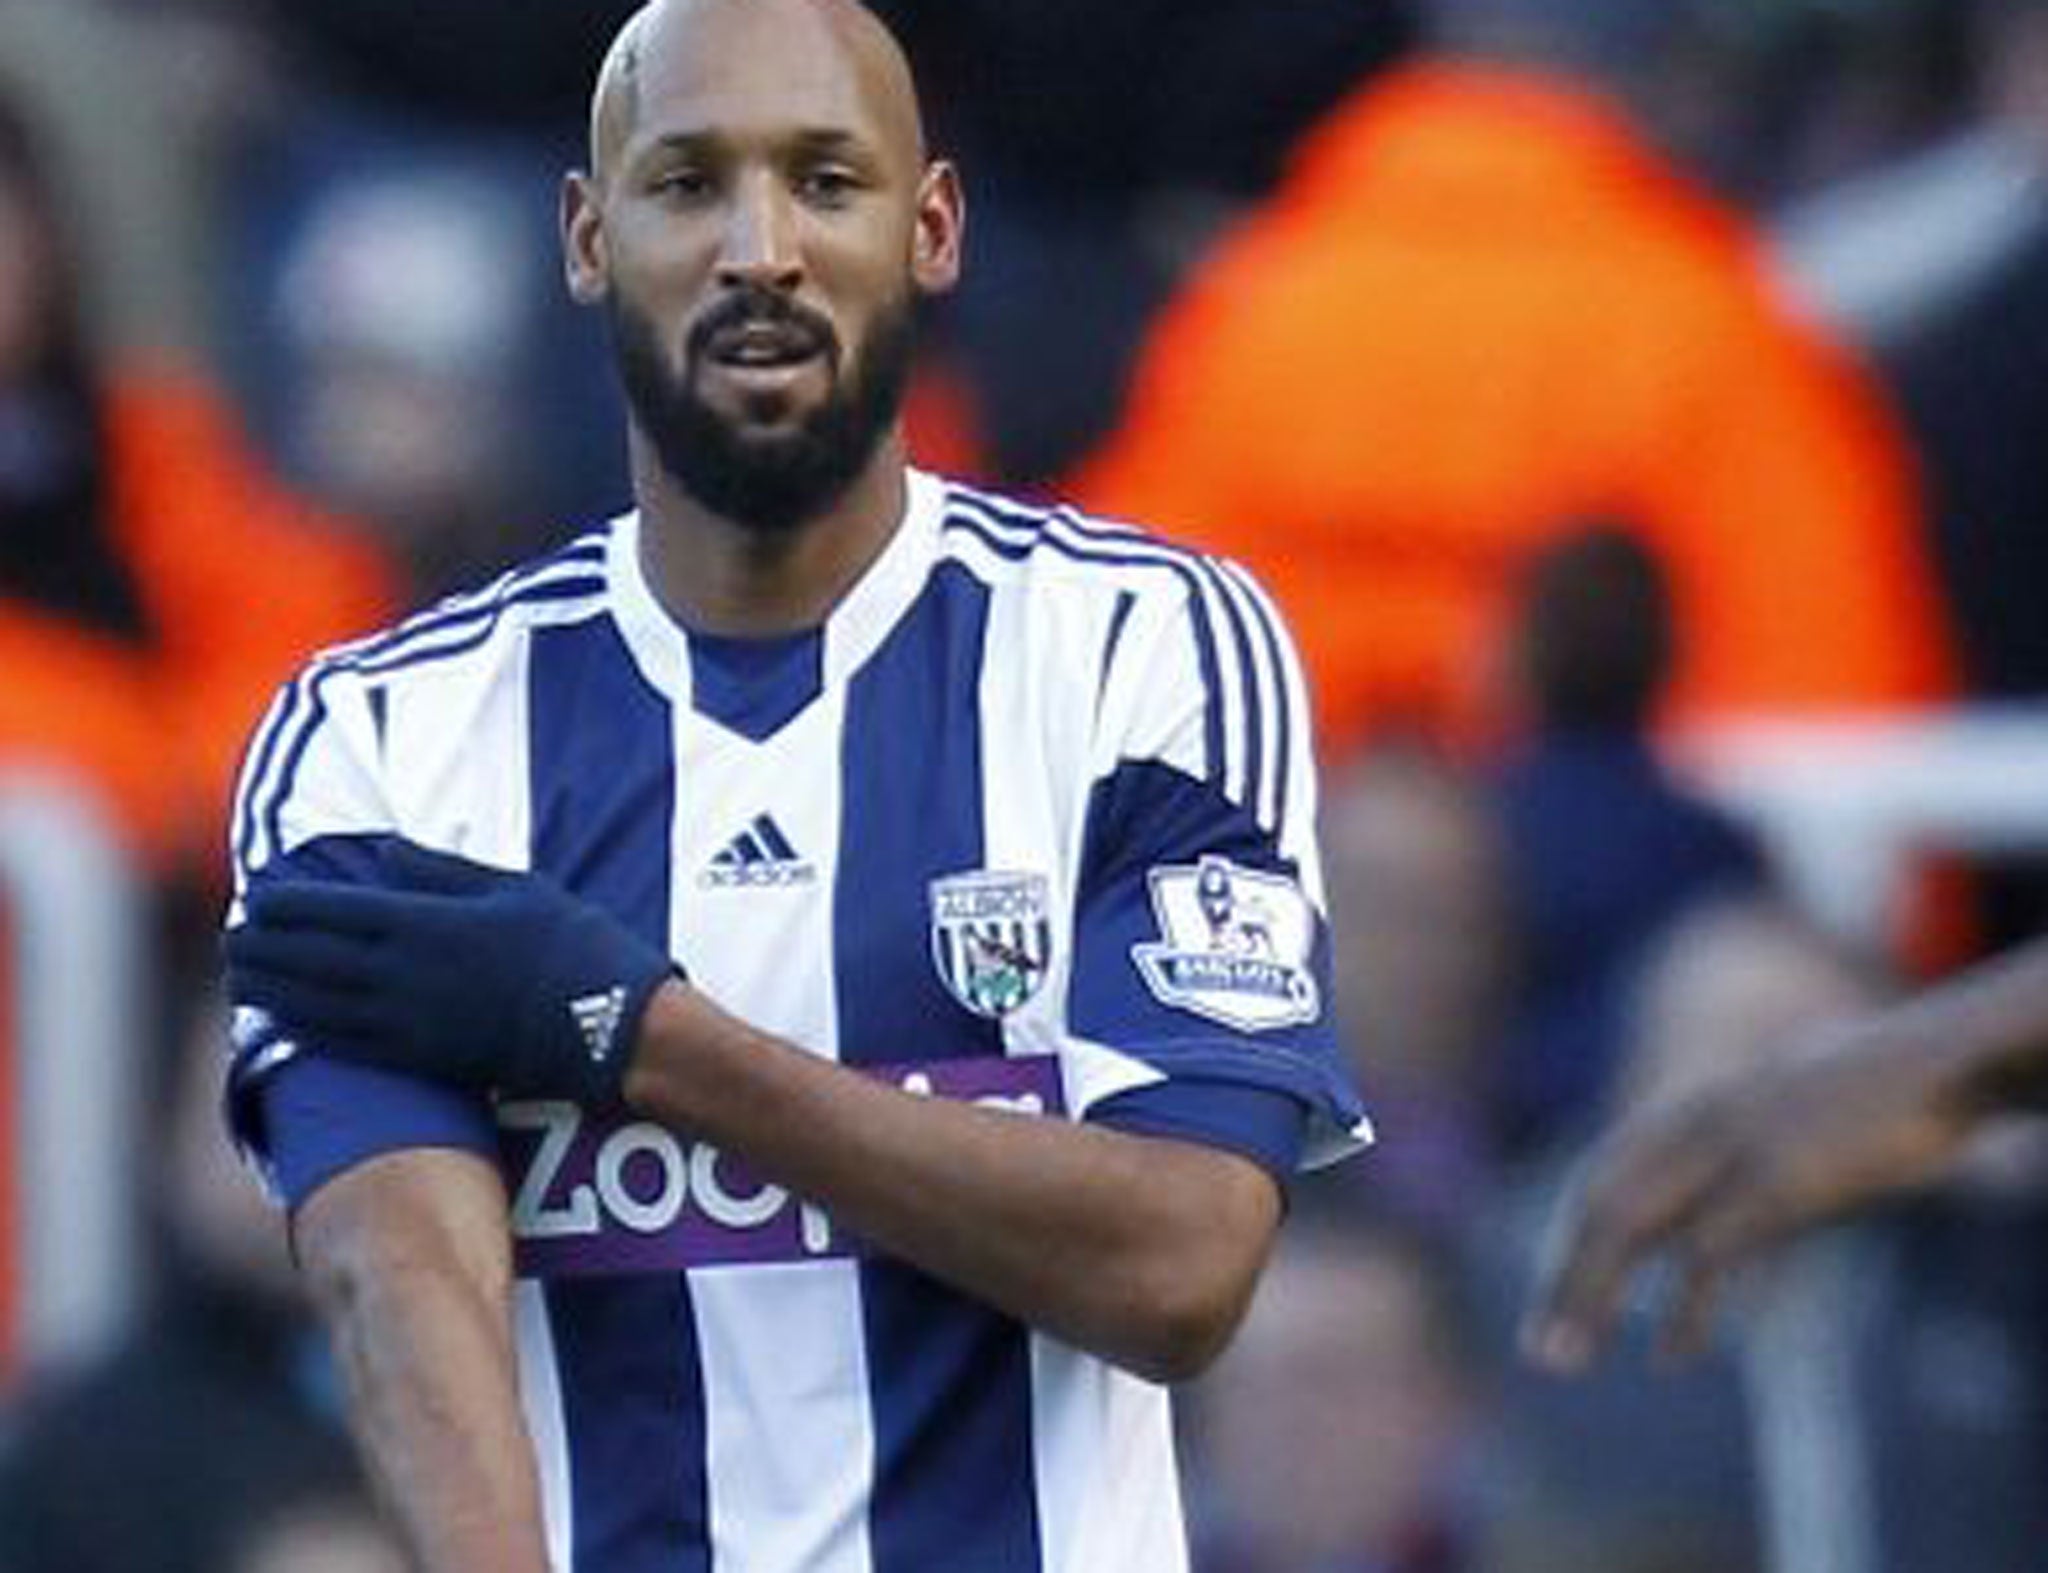 West Brom striker Nicolas Anelka makes an alleged anti-Semitic gesture when celebrating his first goal against West Ham last month